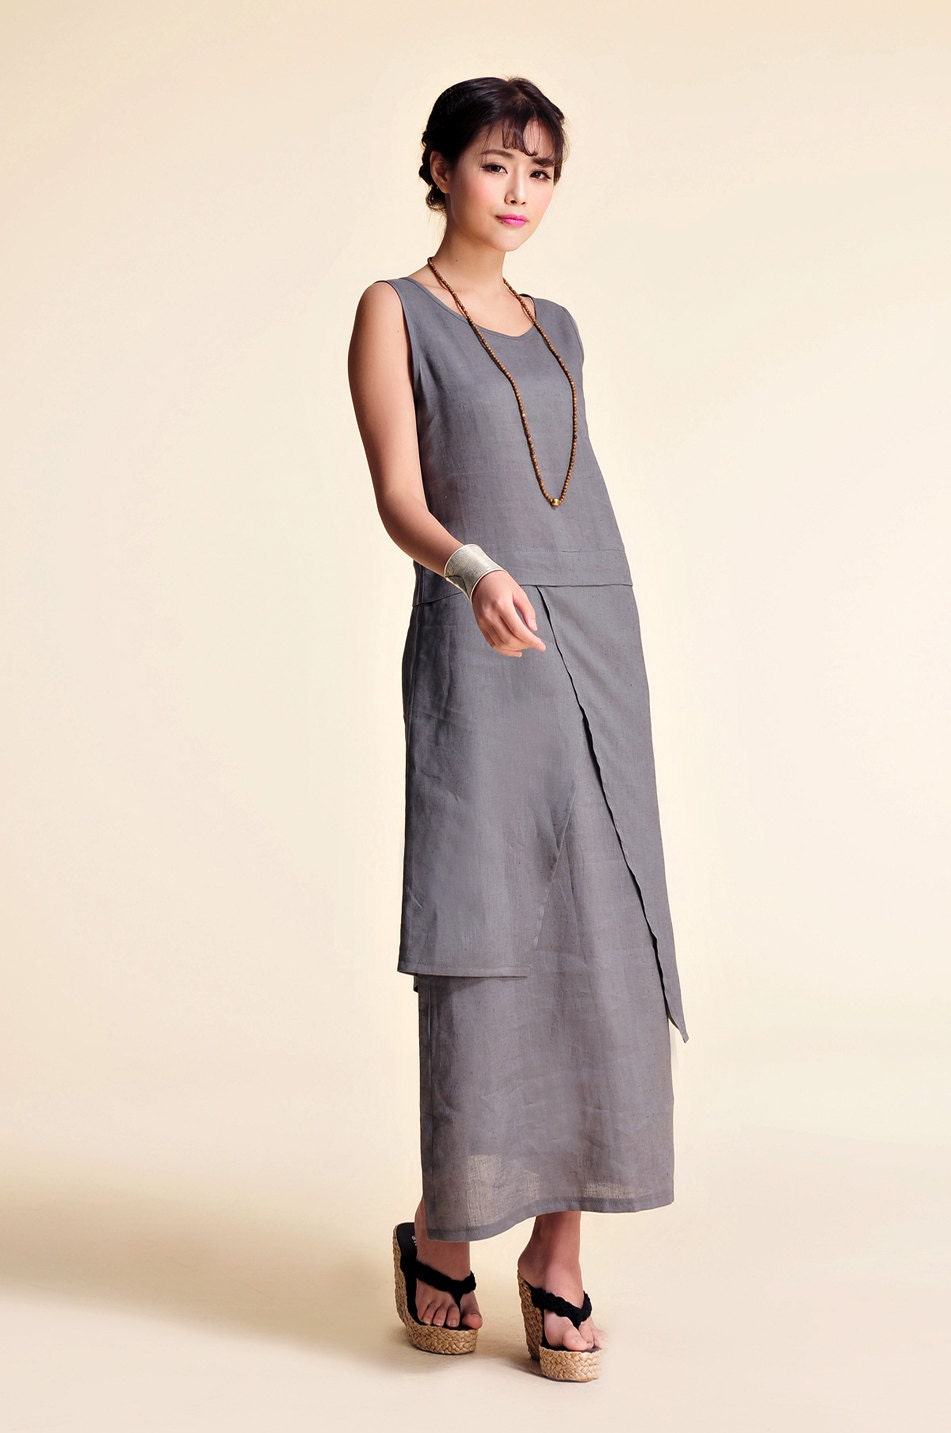 Plum Blossoms/ Asian Style Linen Long Dress With Its Skirt in Two ...